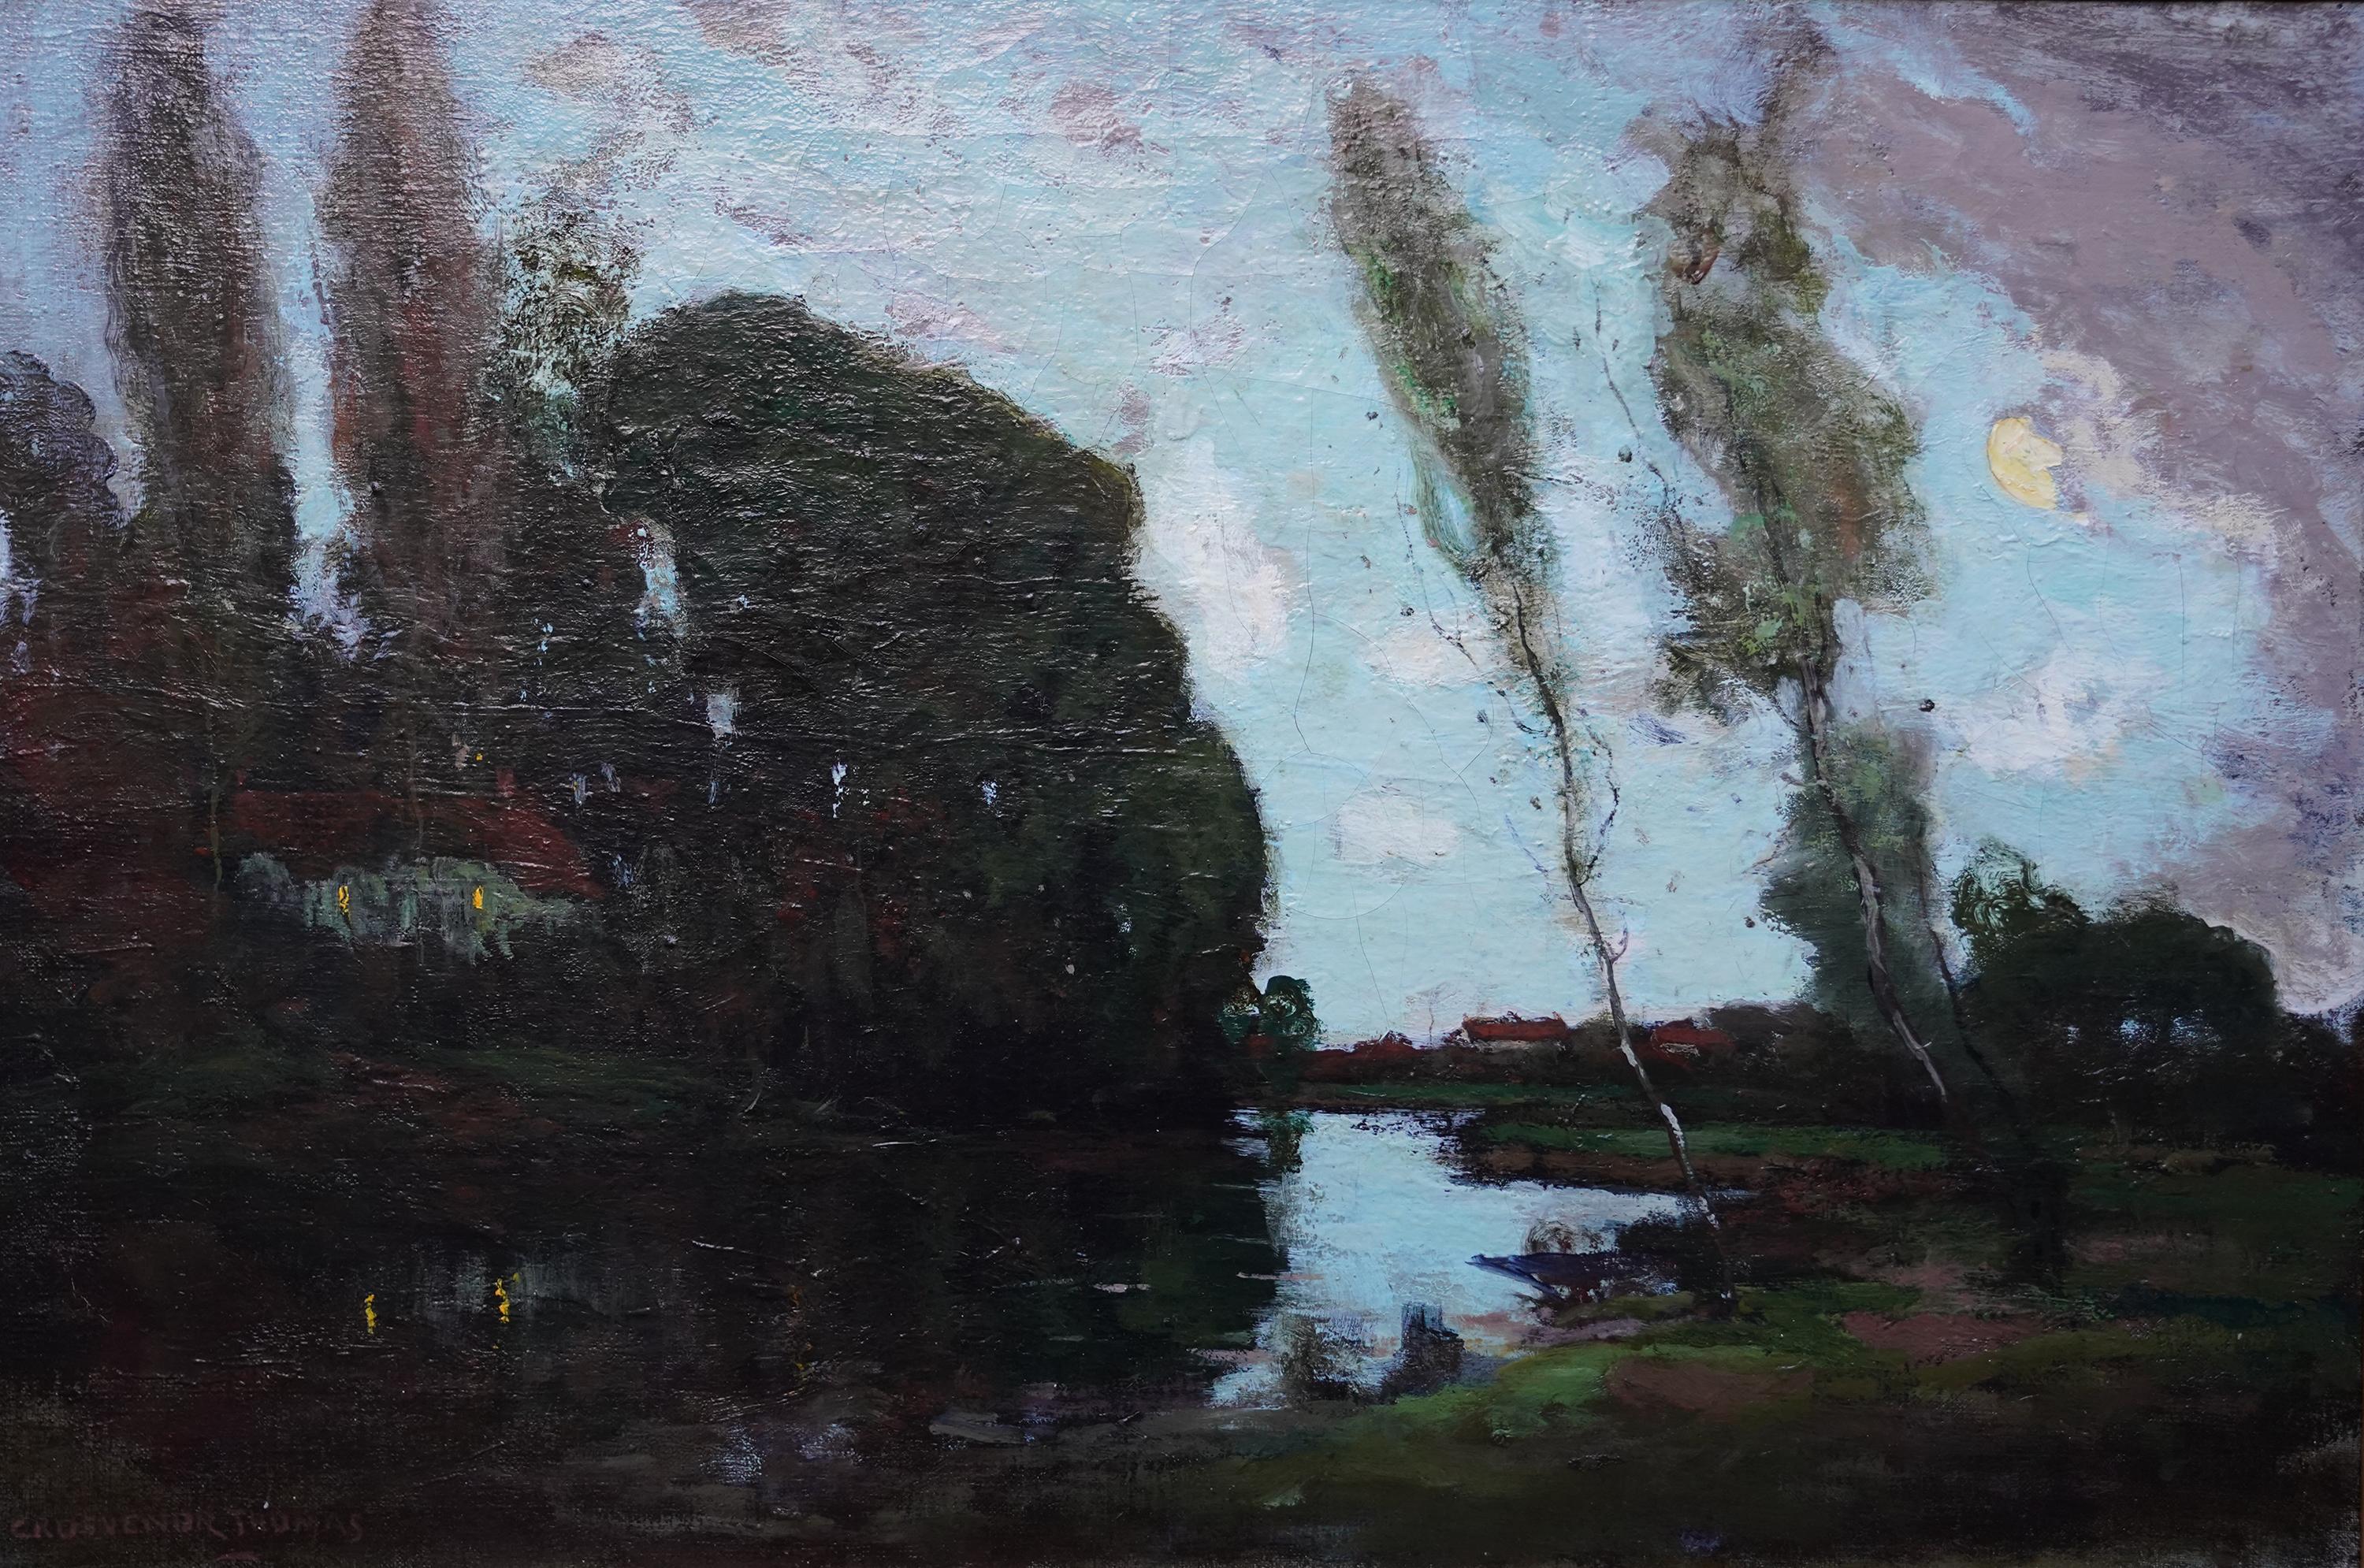 A superb Scottish landscape oil painting by Glasgow Boy artist George Grosvenor Thomas. Painted circa 1900 the composition is a river landscape, the river running through fields with a dwelling nestling in the trees, its lights reflecting in the